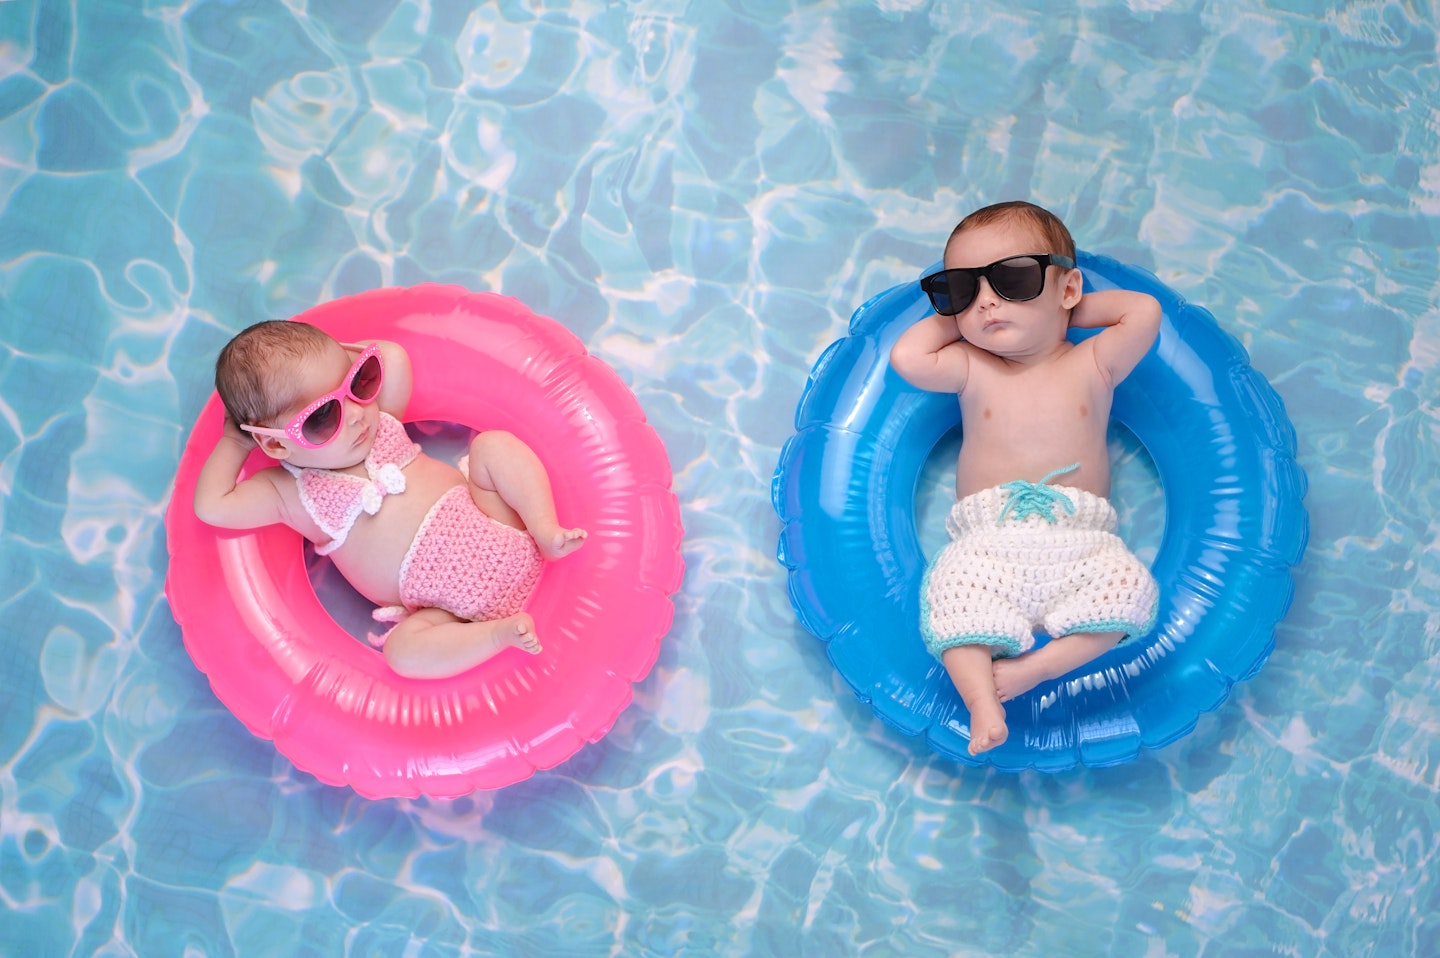 Babies floating in inflatables in a pool